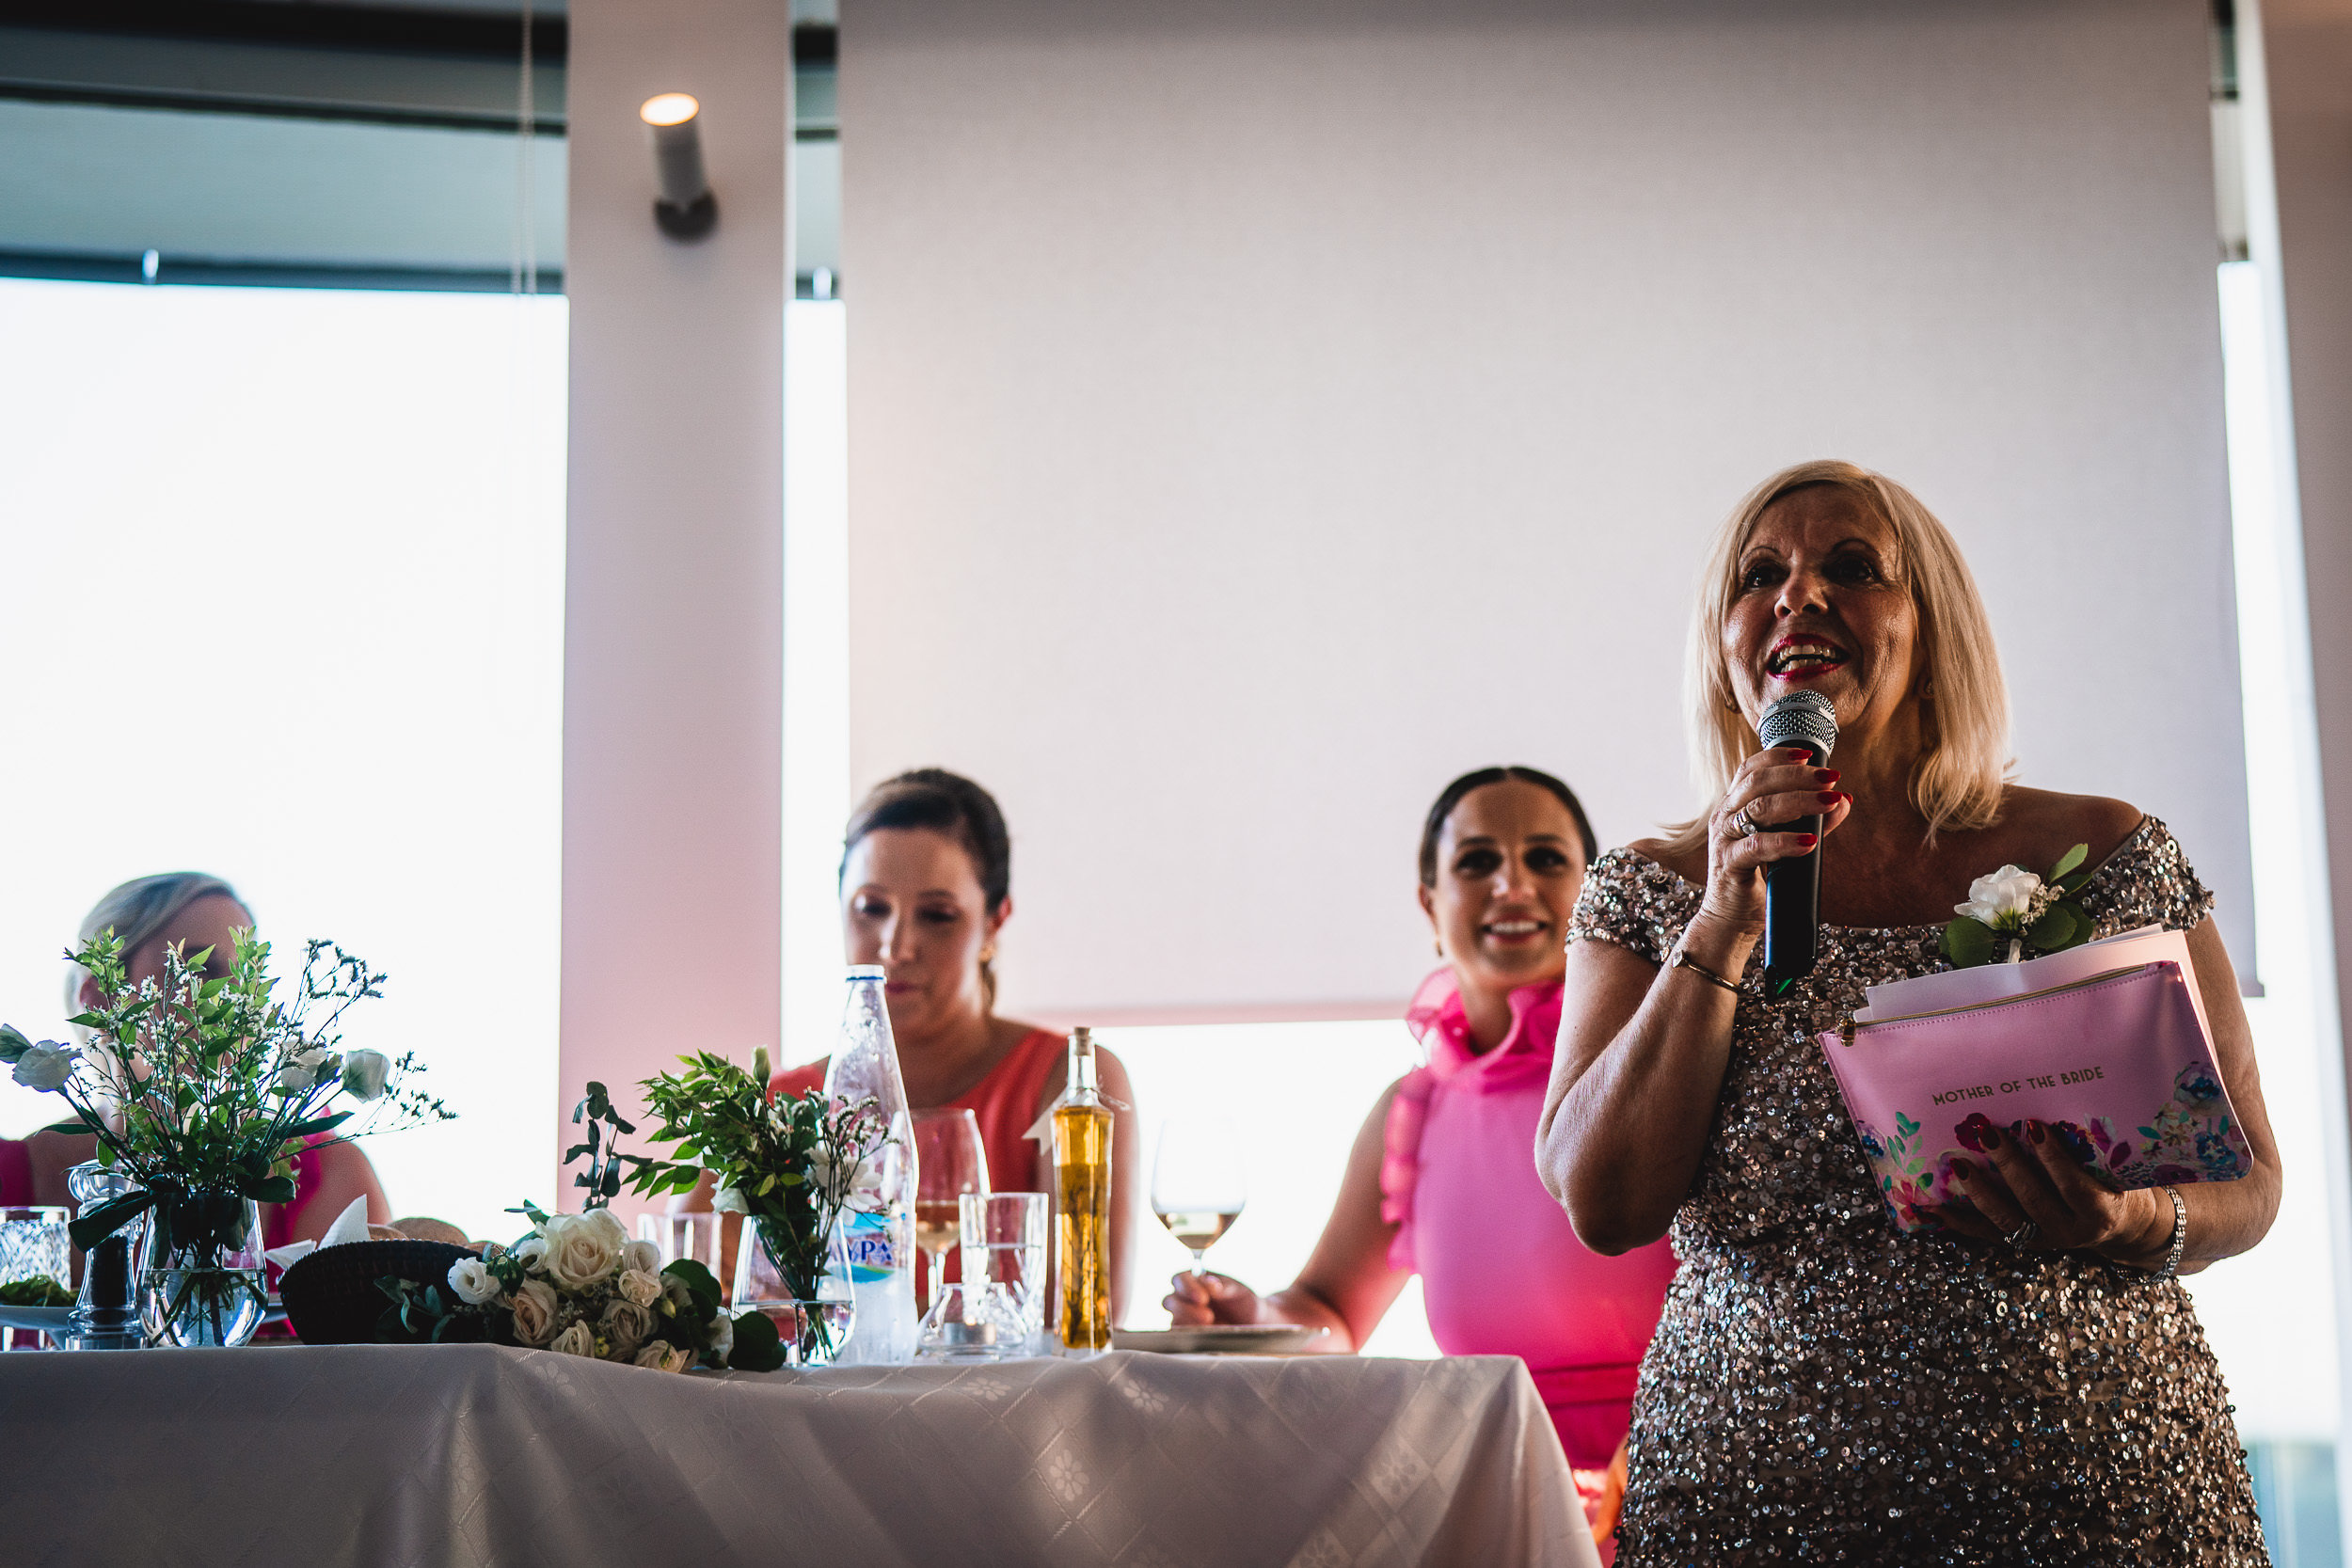 At a wedding celebration, a woman energetically addresses the crowd with a microphone as the groom and wedding photographer eagerly listen.